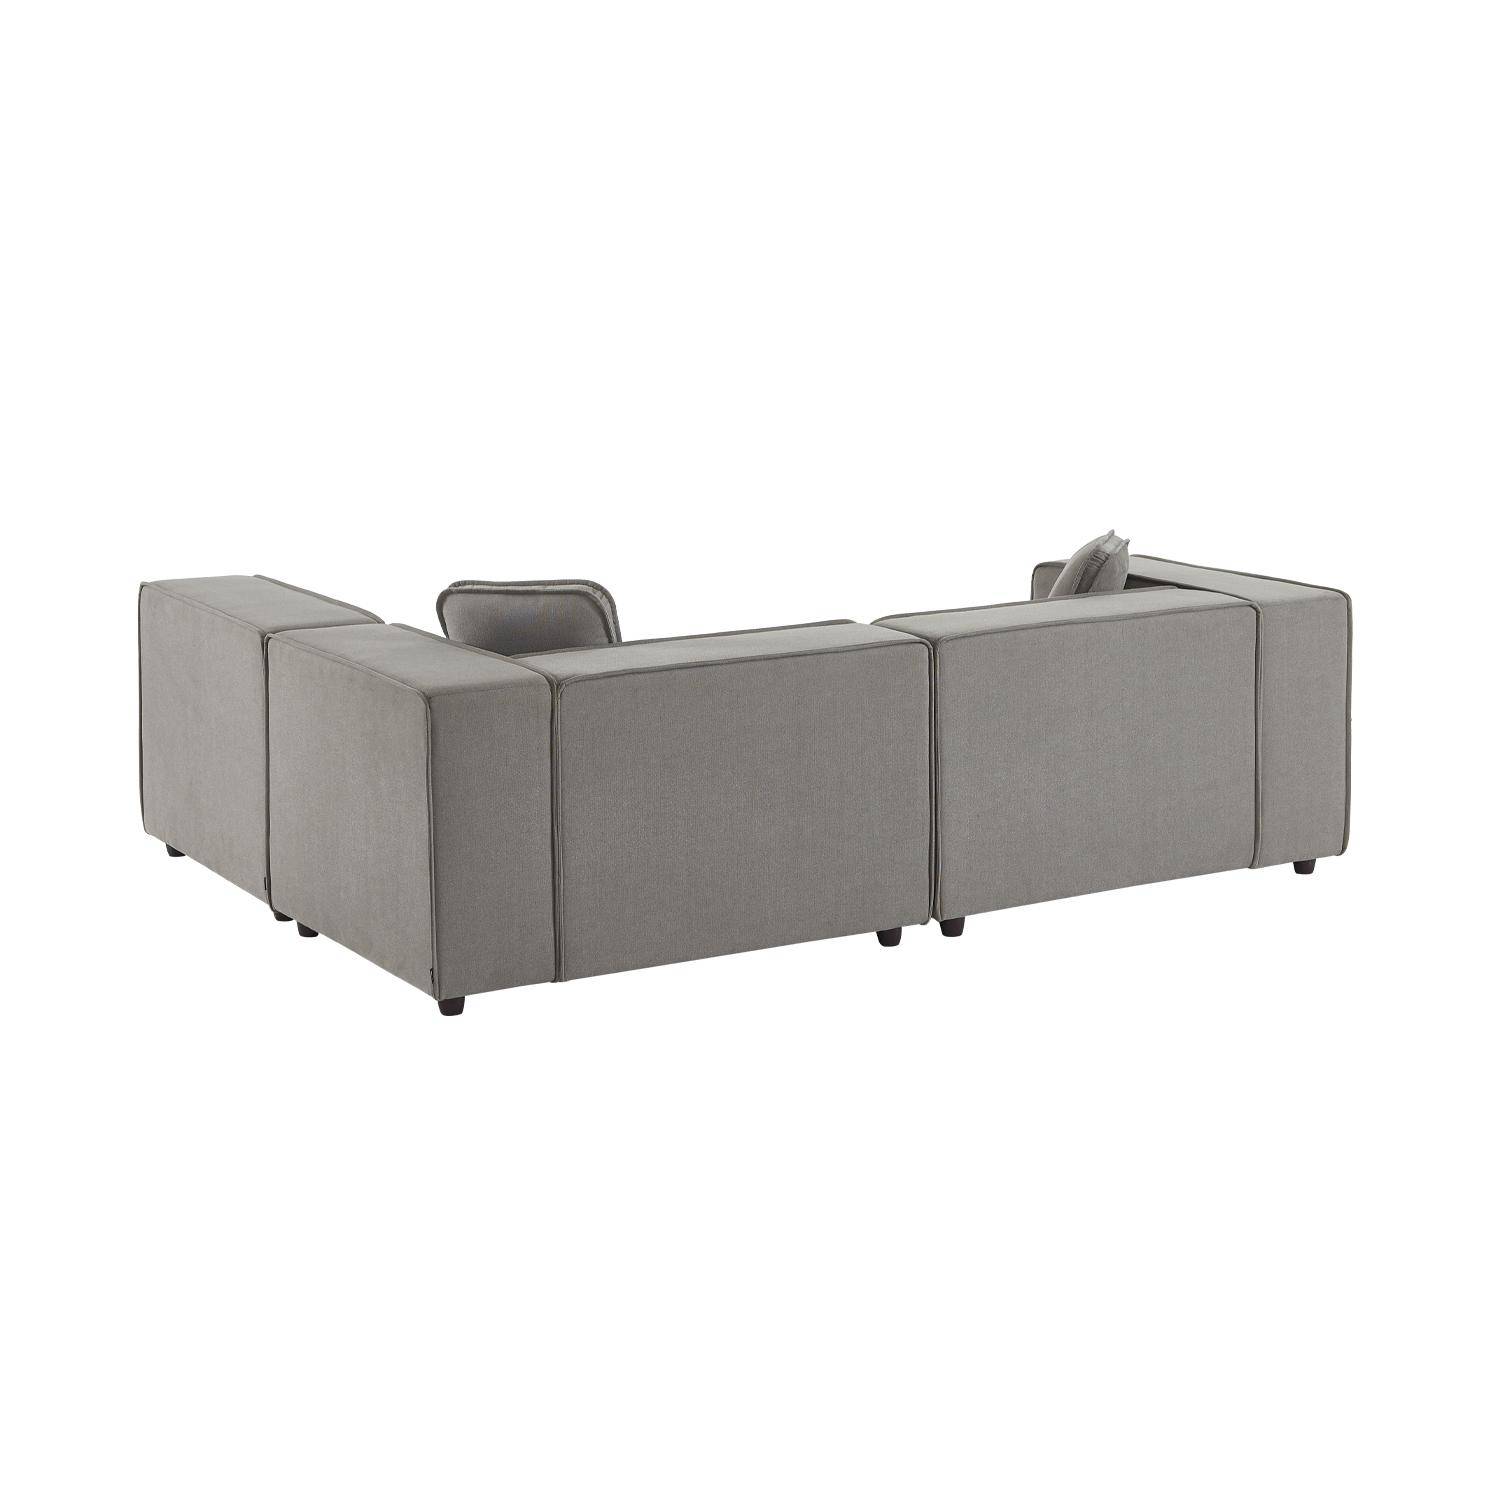 Modular sofa in water-repellent grey fabric for 3-4 people, 2 corners + 1 seat + 1 footstool Photo7